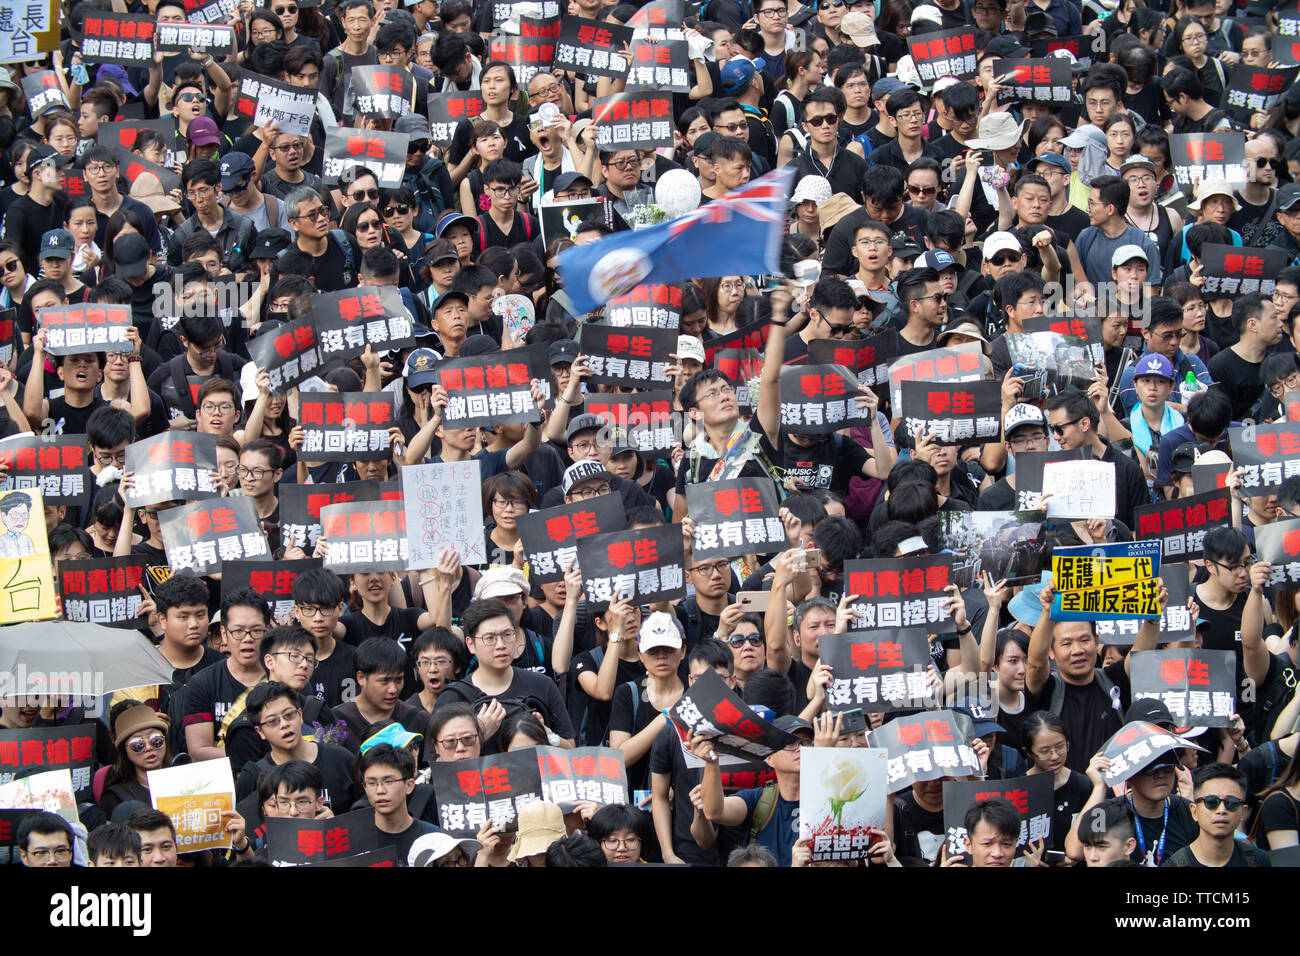 Hong Kong, Hong Kong. 16 June, 2019. Protesters march carrying signs decrying the police violence of previous marches and their declaration as a riot. Credit: Danny Tsai/Alamy Live News Stock Photo